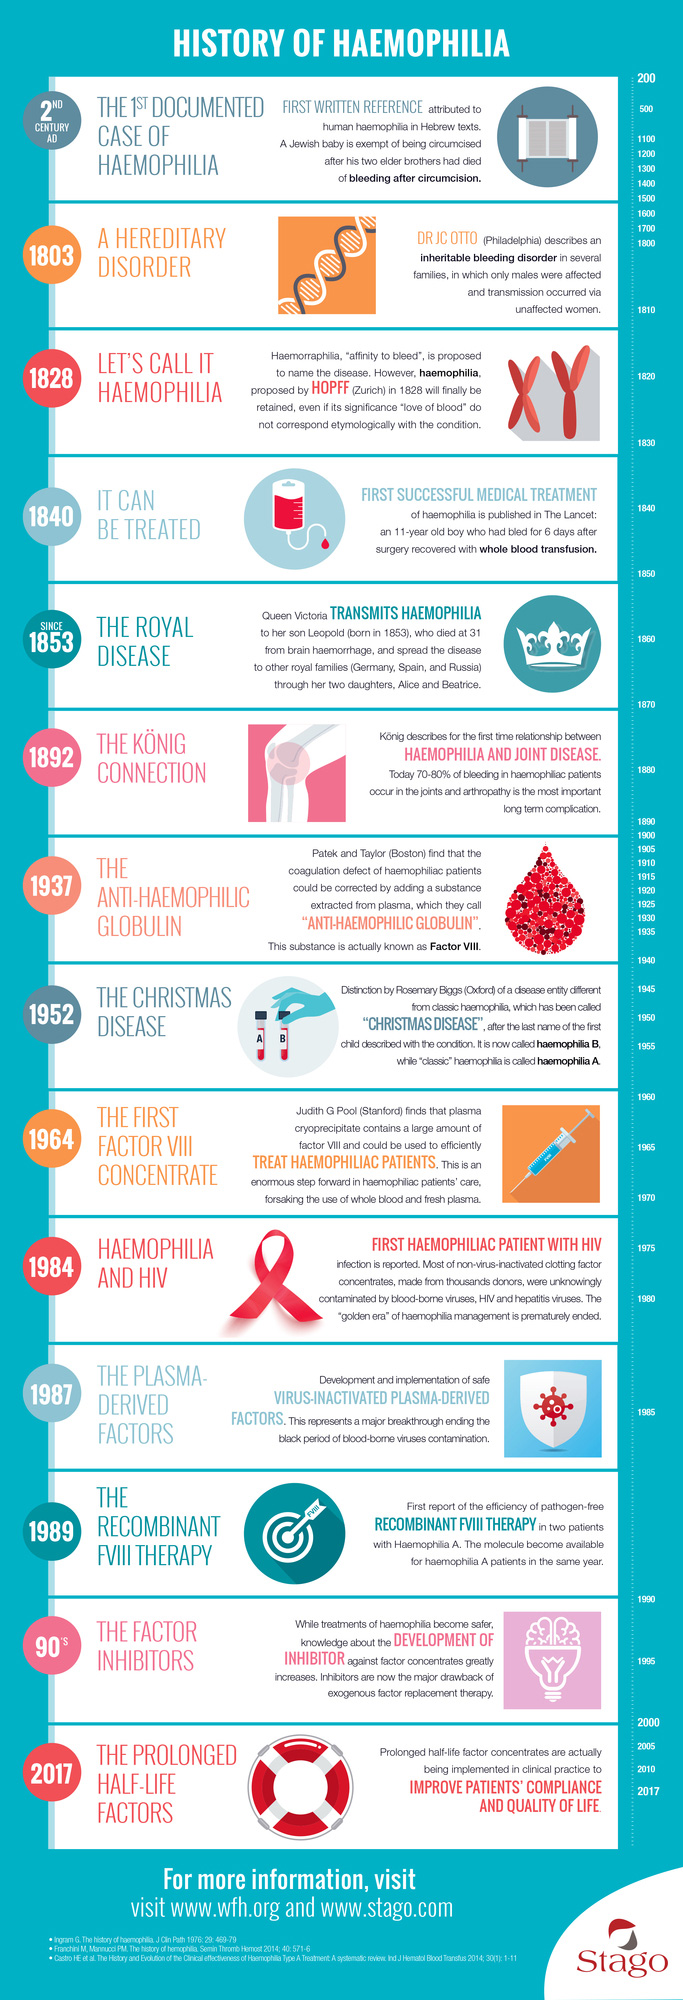 History of Haemophilia: infographic from the first written record to the present day 